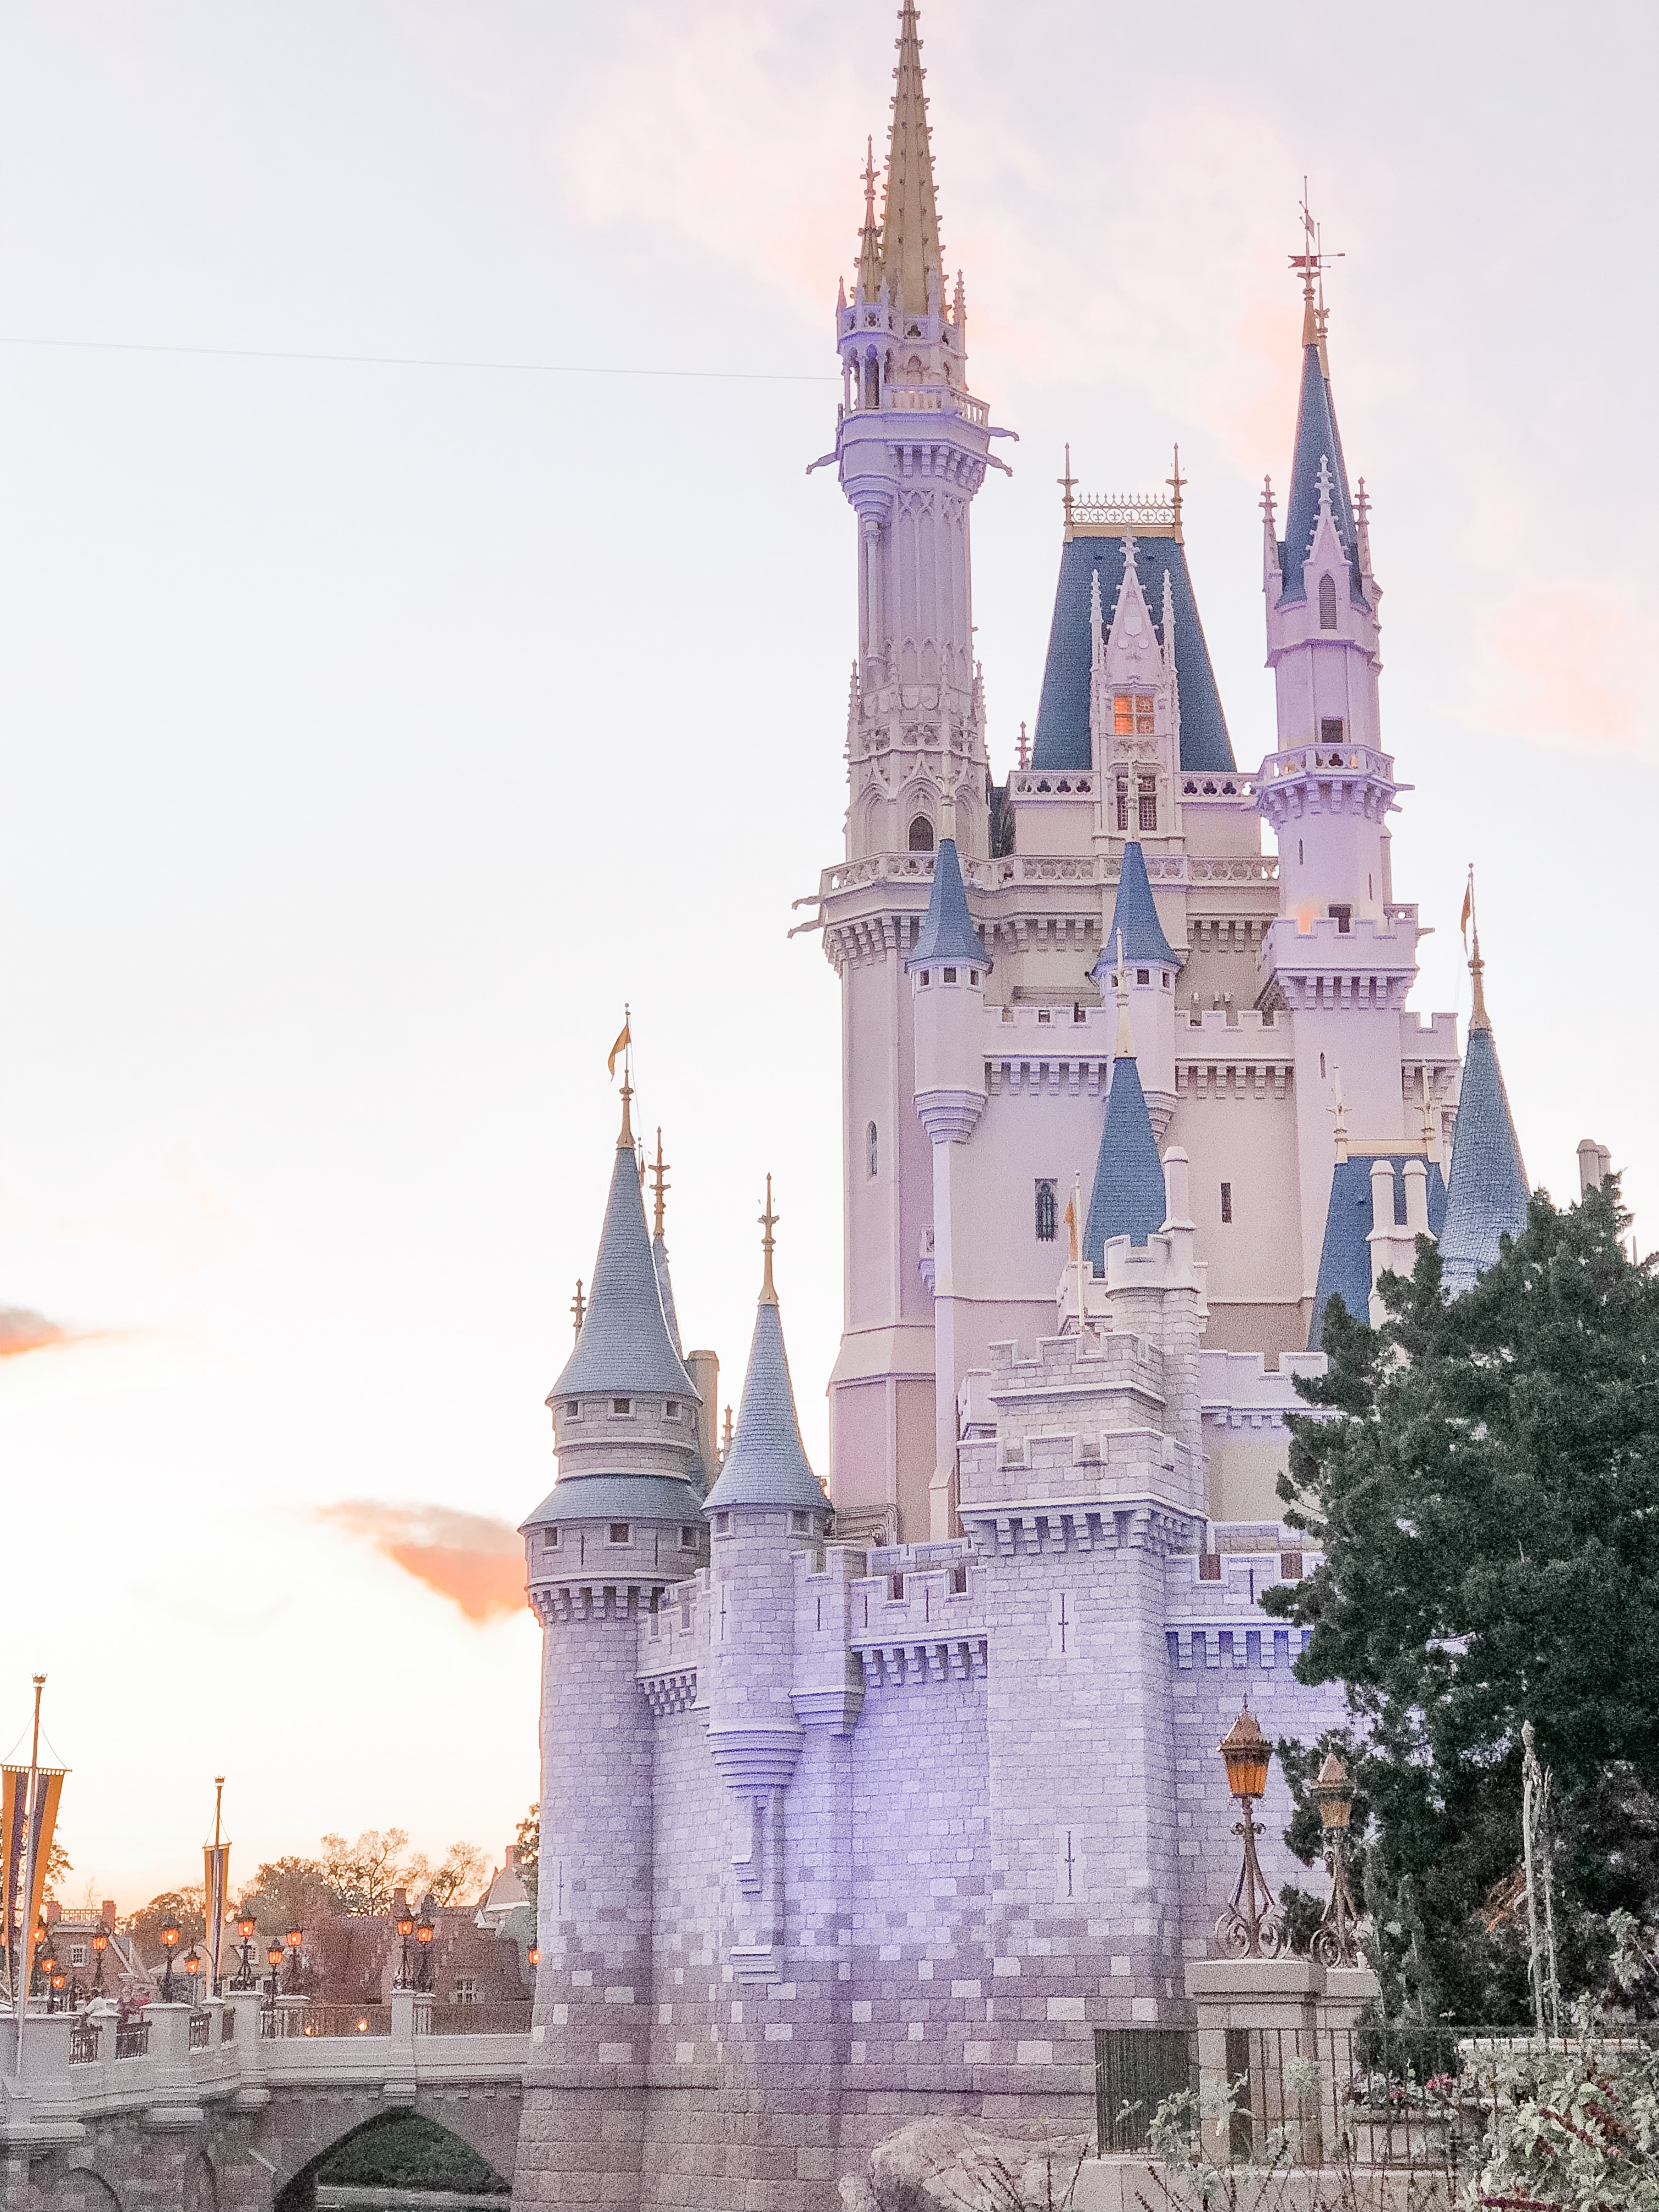 A side view of Cinderella's Castle at Disney's Magic Kingdom (right side) with hues of purple and pink lighting throughout the outside of the castle during beginning sunset stages.